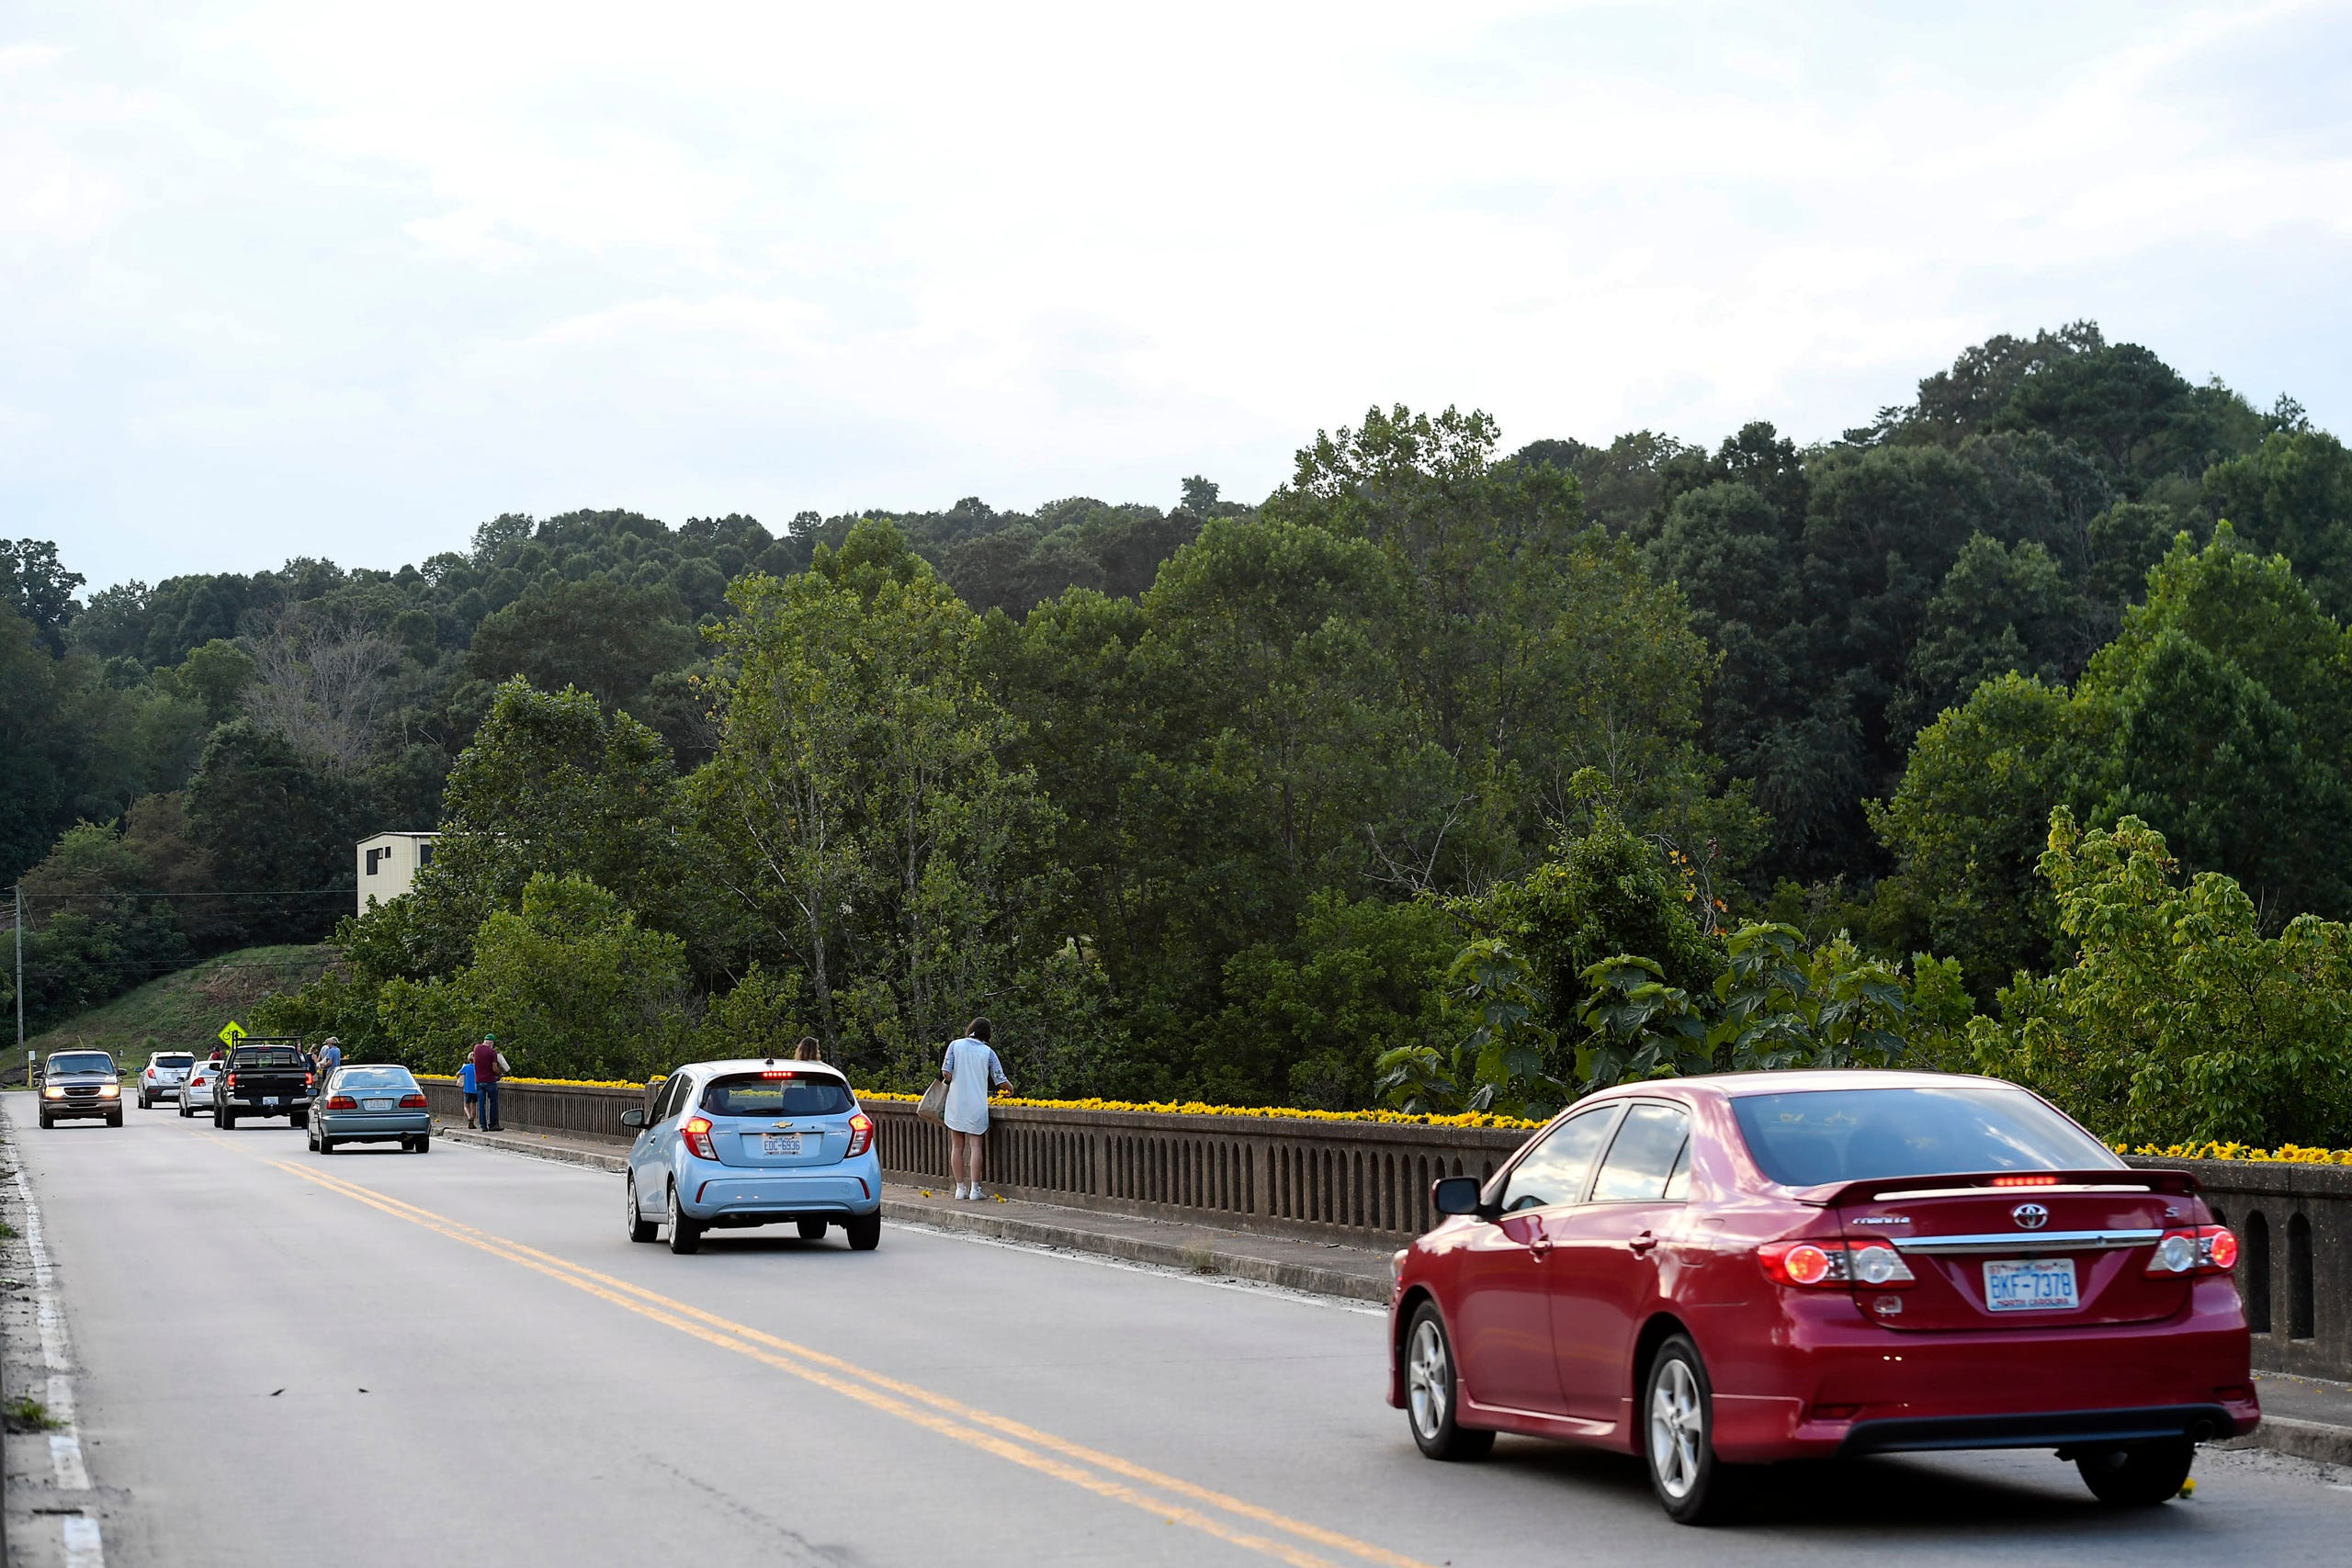 Residents of the Olivette community picked sunflowers to spread cheer across the Craggy Bridge in Woodfin August 19, 2020.